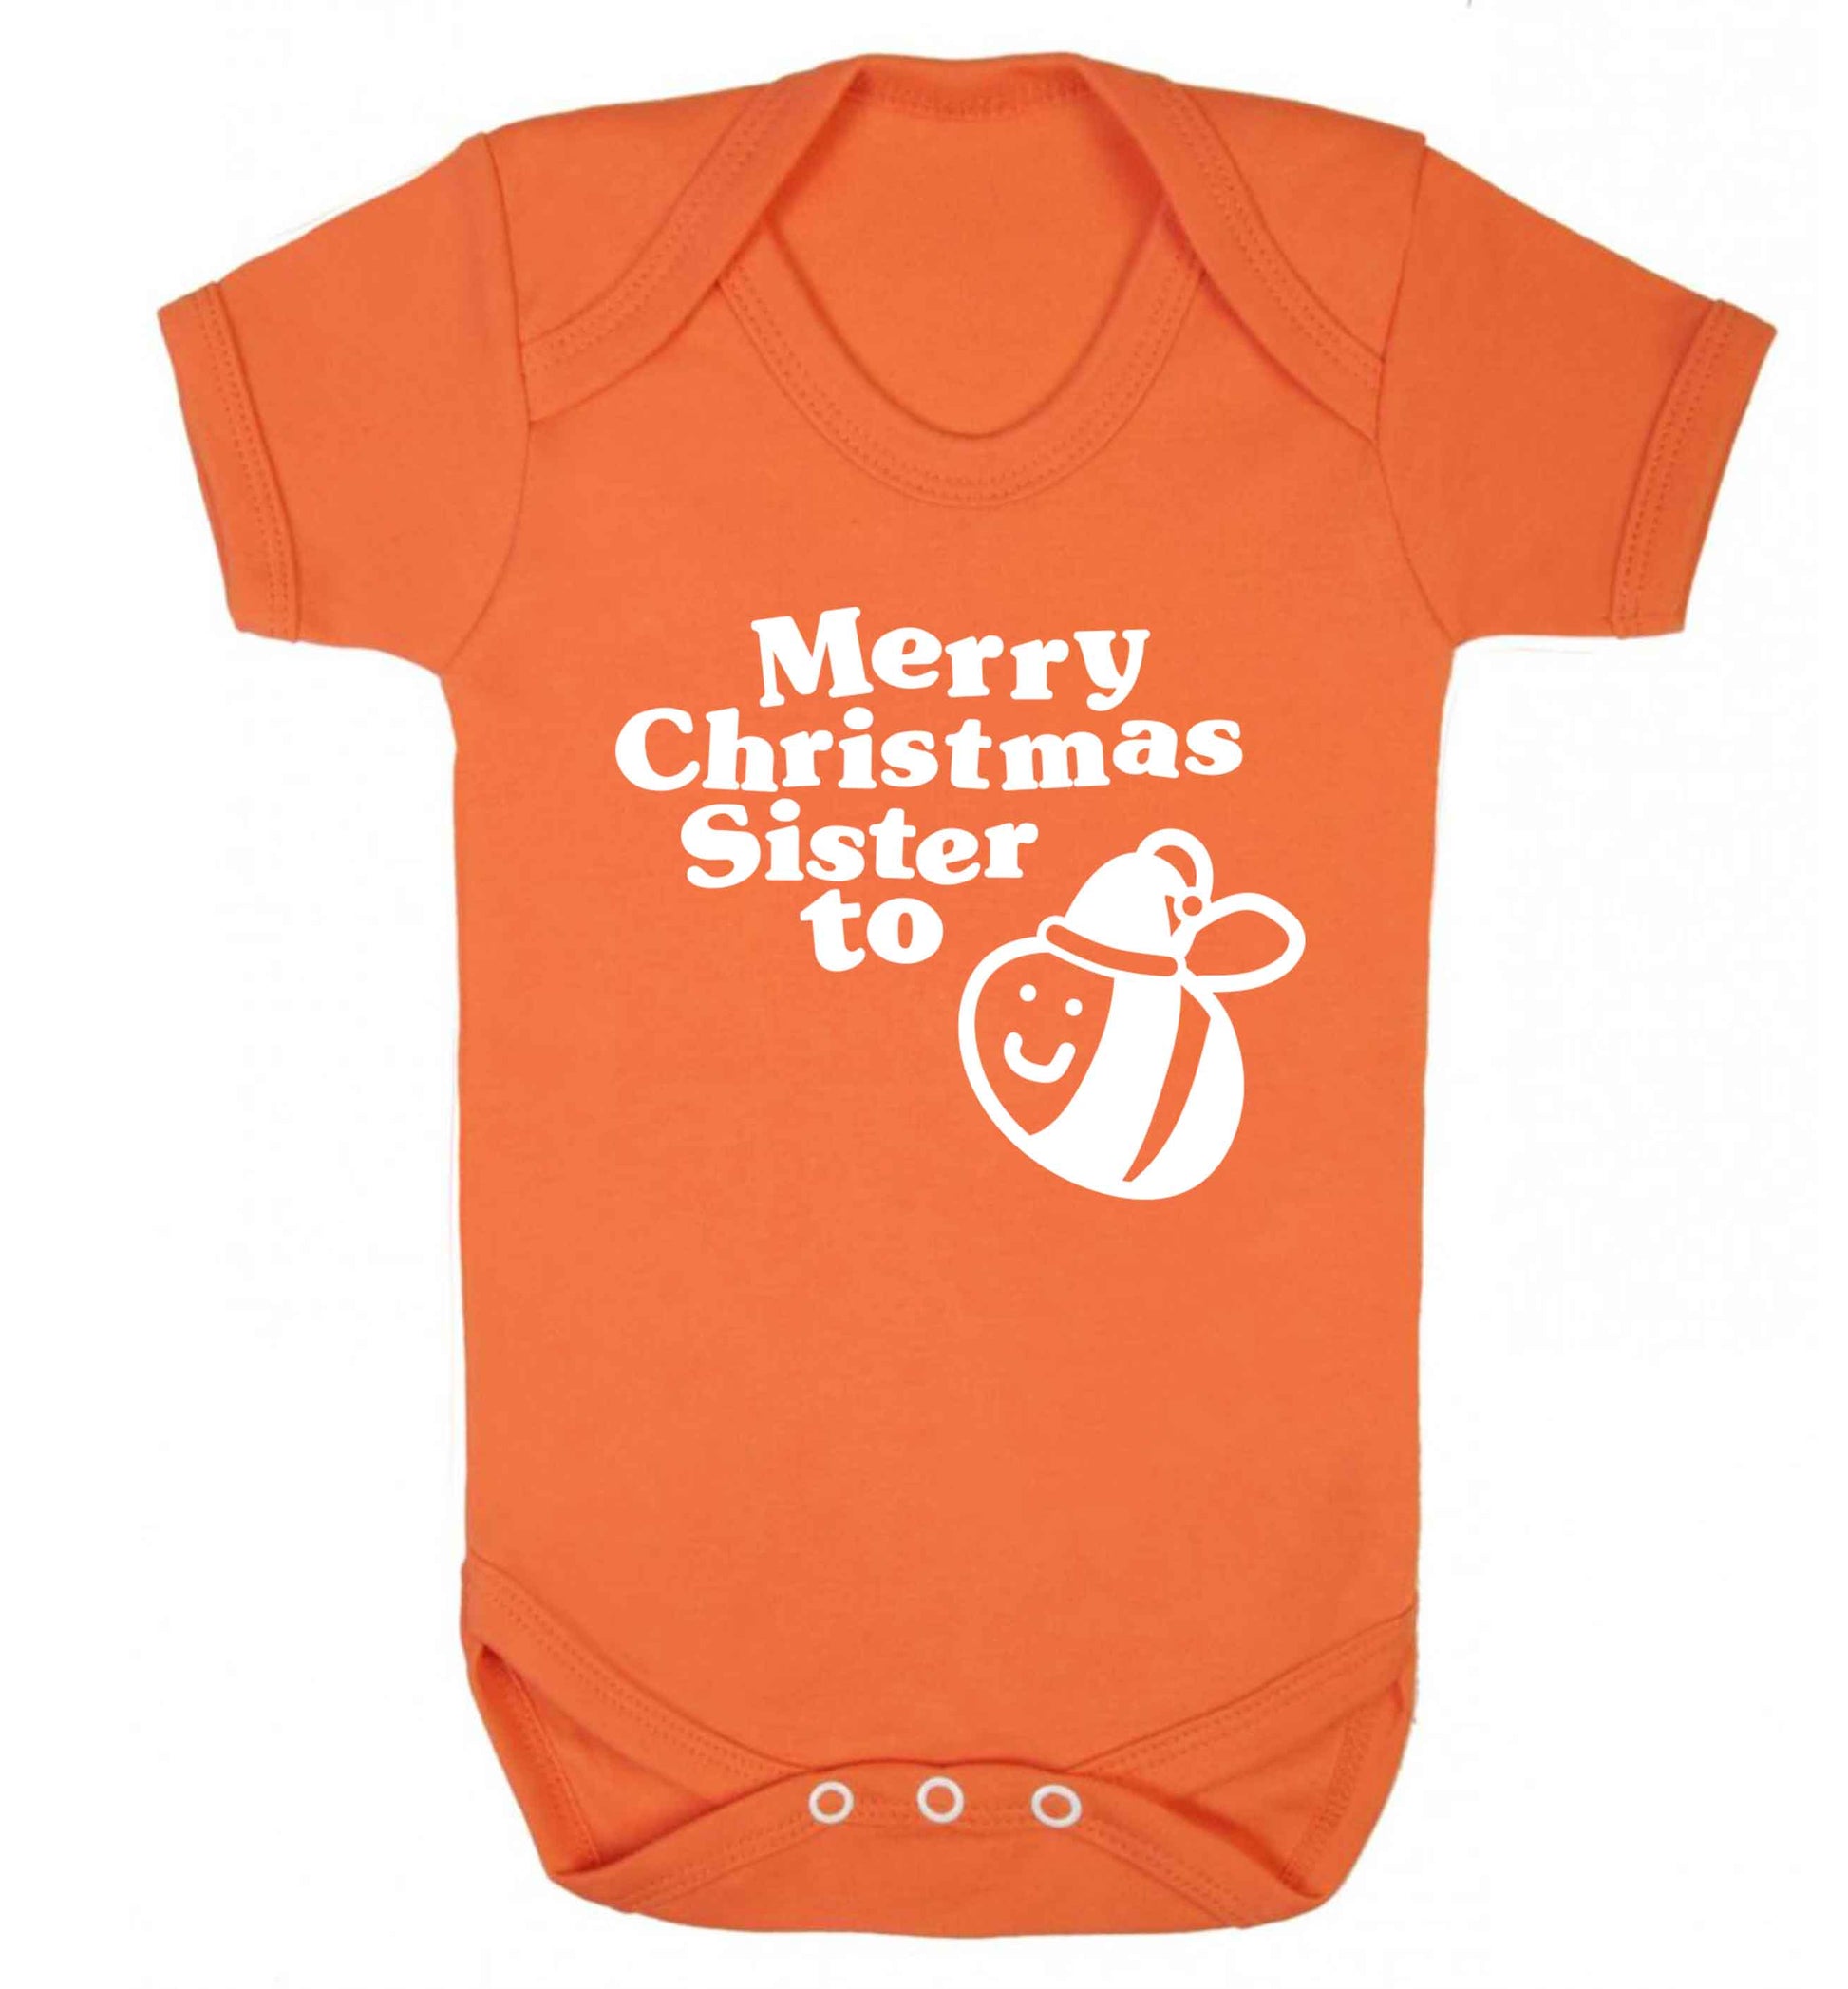 Merry Christmas sister to be Baby Vest orange 18-24 months